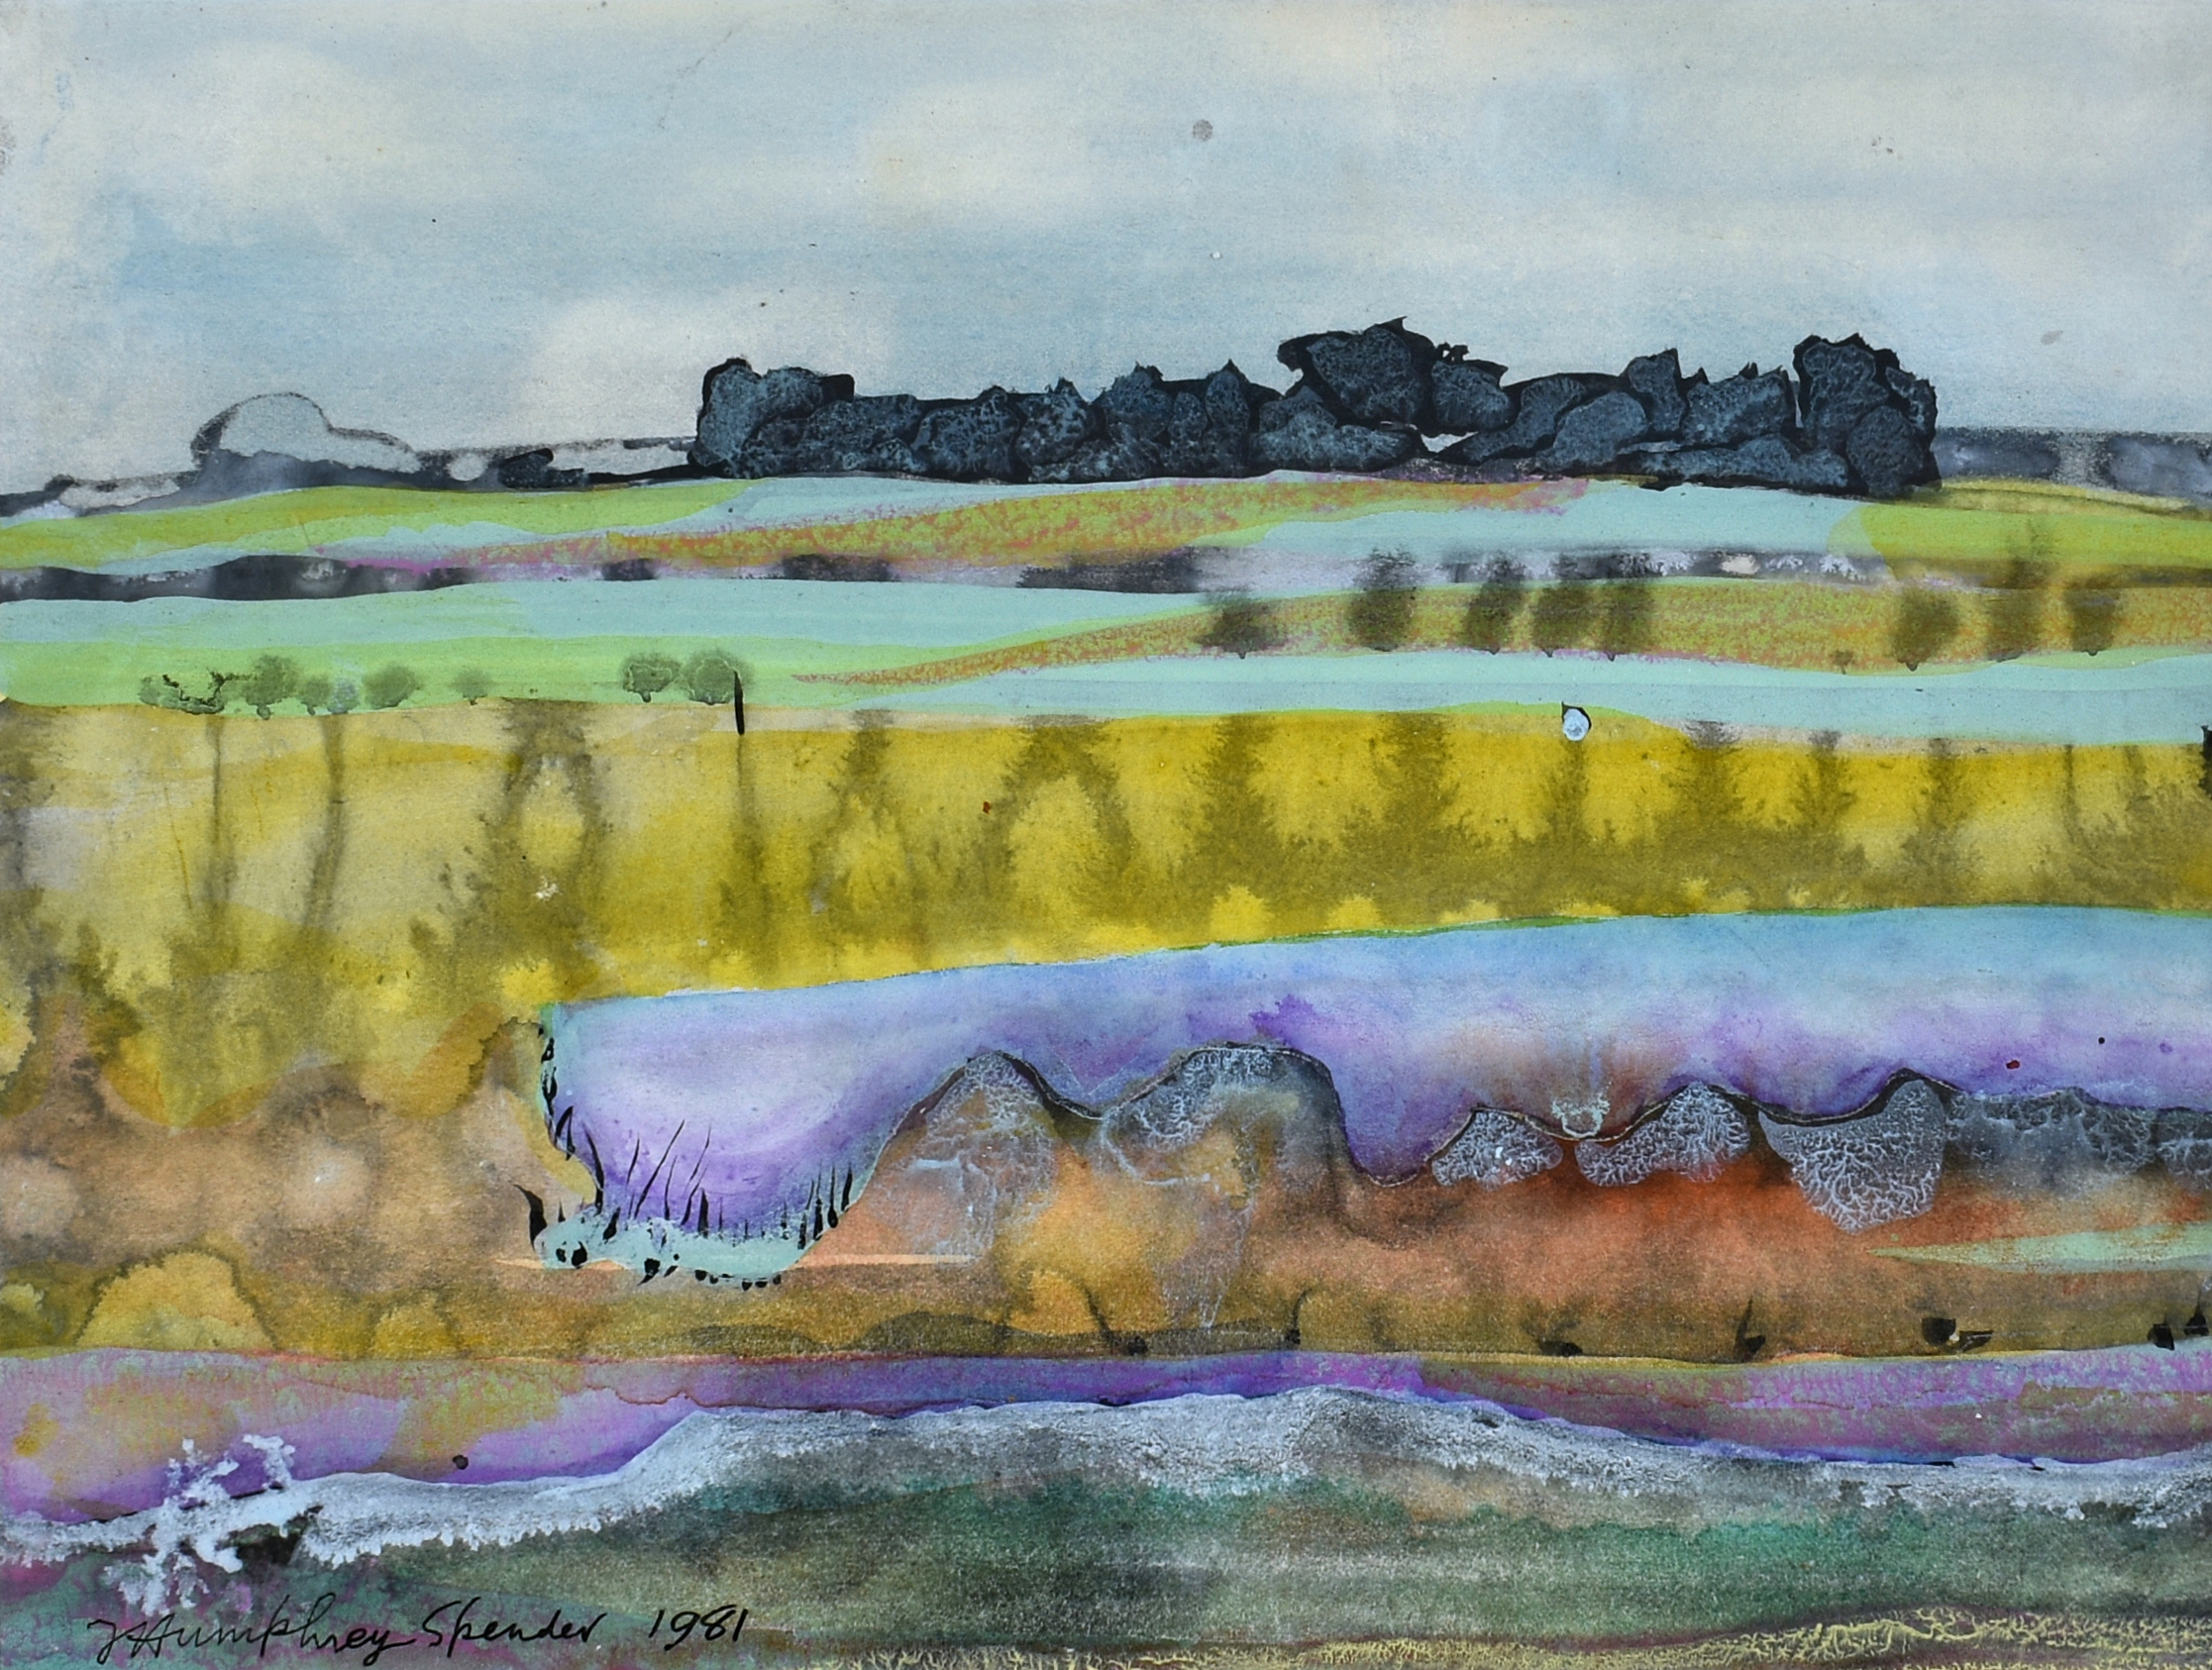 John Humphrey Spender (British, 1910-2005), "Essex Fields" watercolour and ink. inscribed on